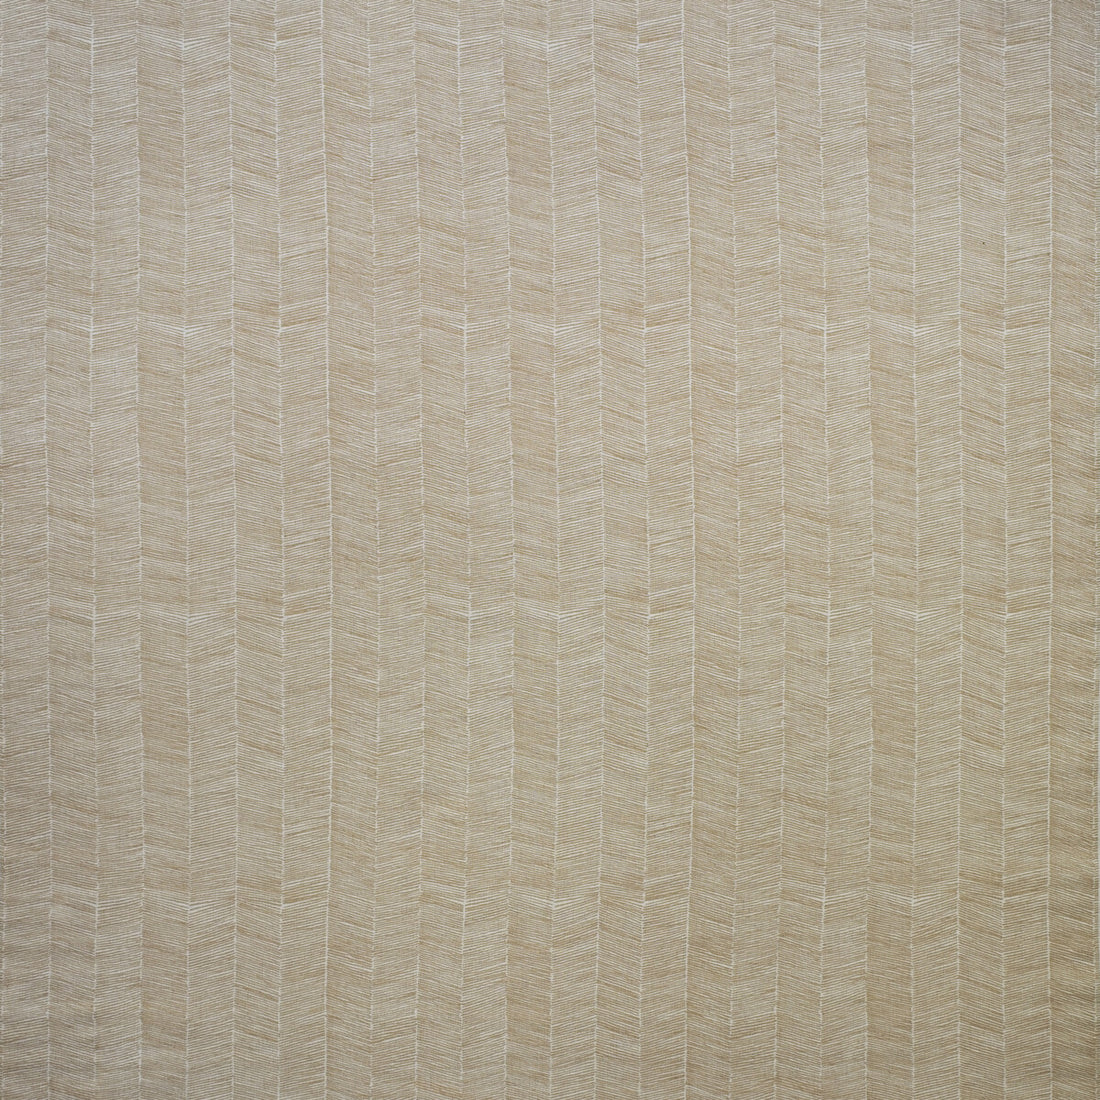 Fasano fabric in almond color - pattern AM100341.6.0 - by Kravet Couture in the Andrew Martin Salento collection